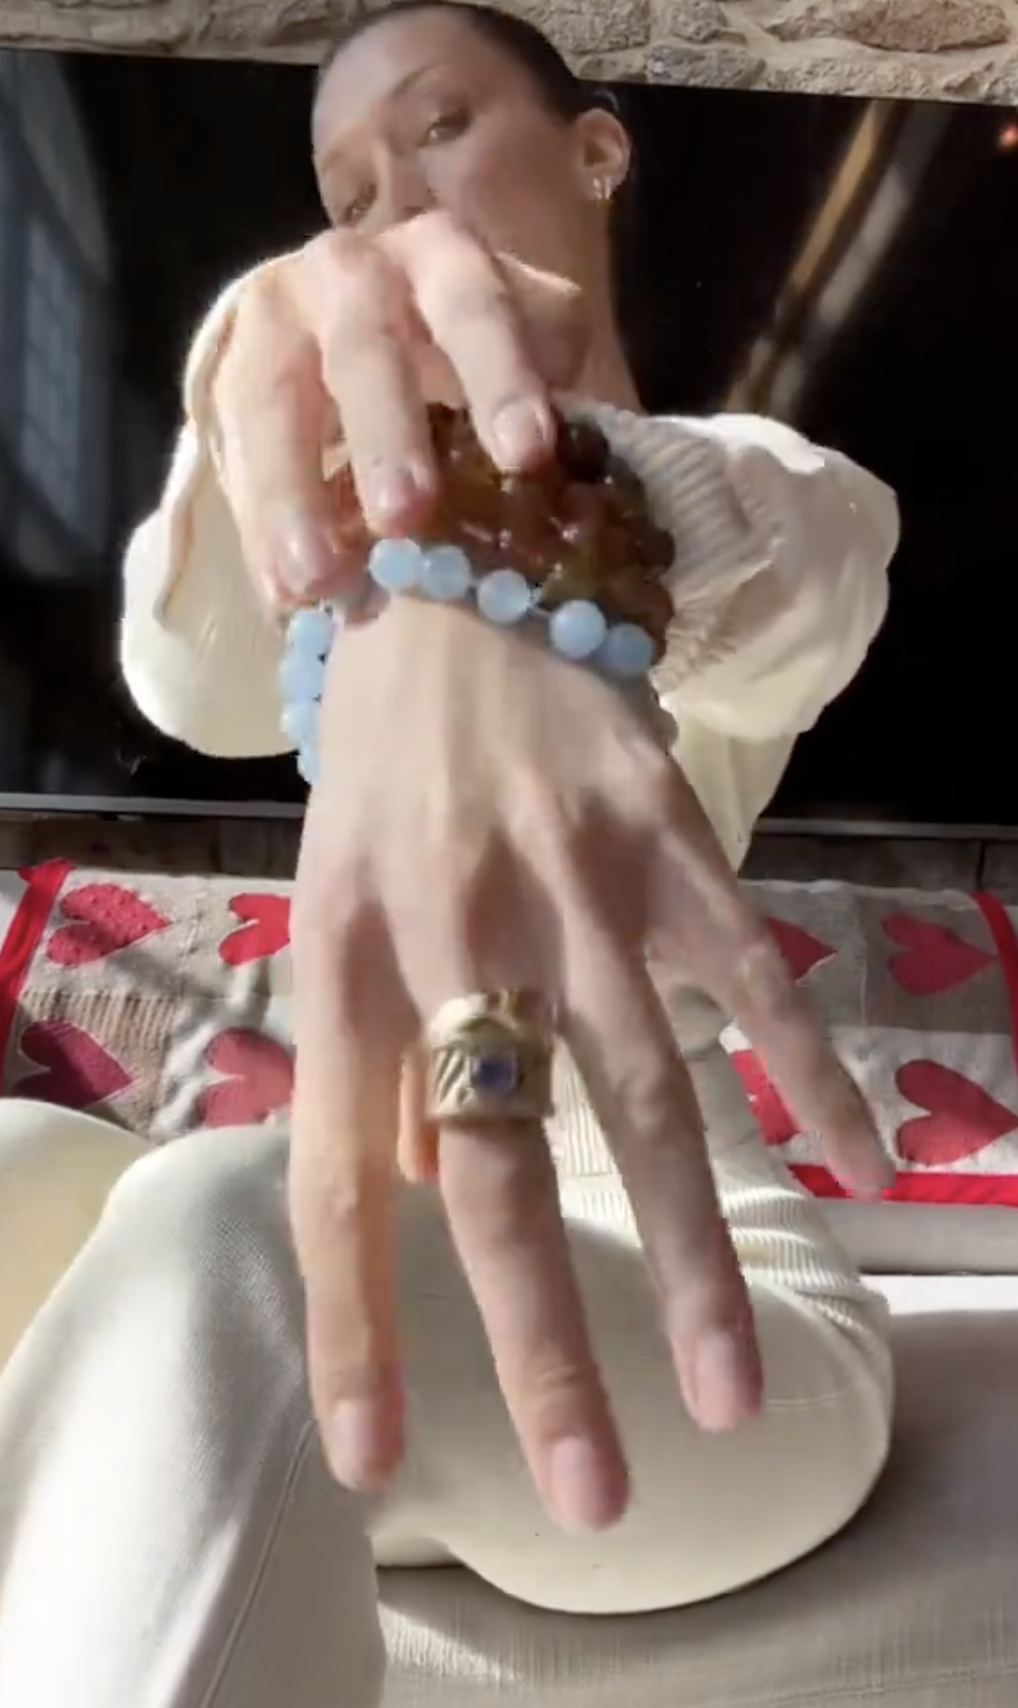 Bella in a white shirt and cream pants puts on various bracelets and a ring